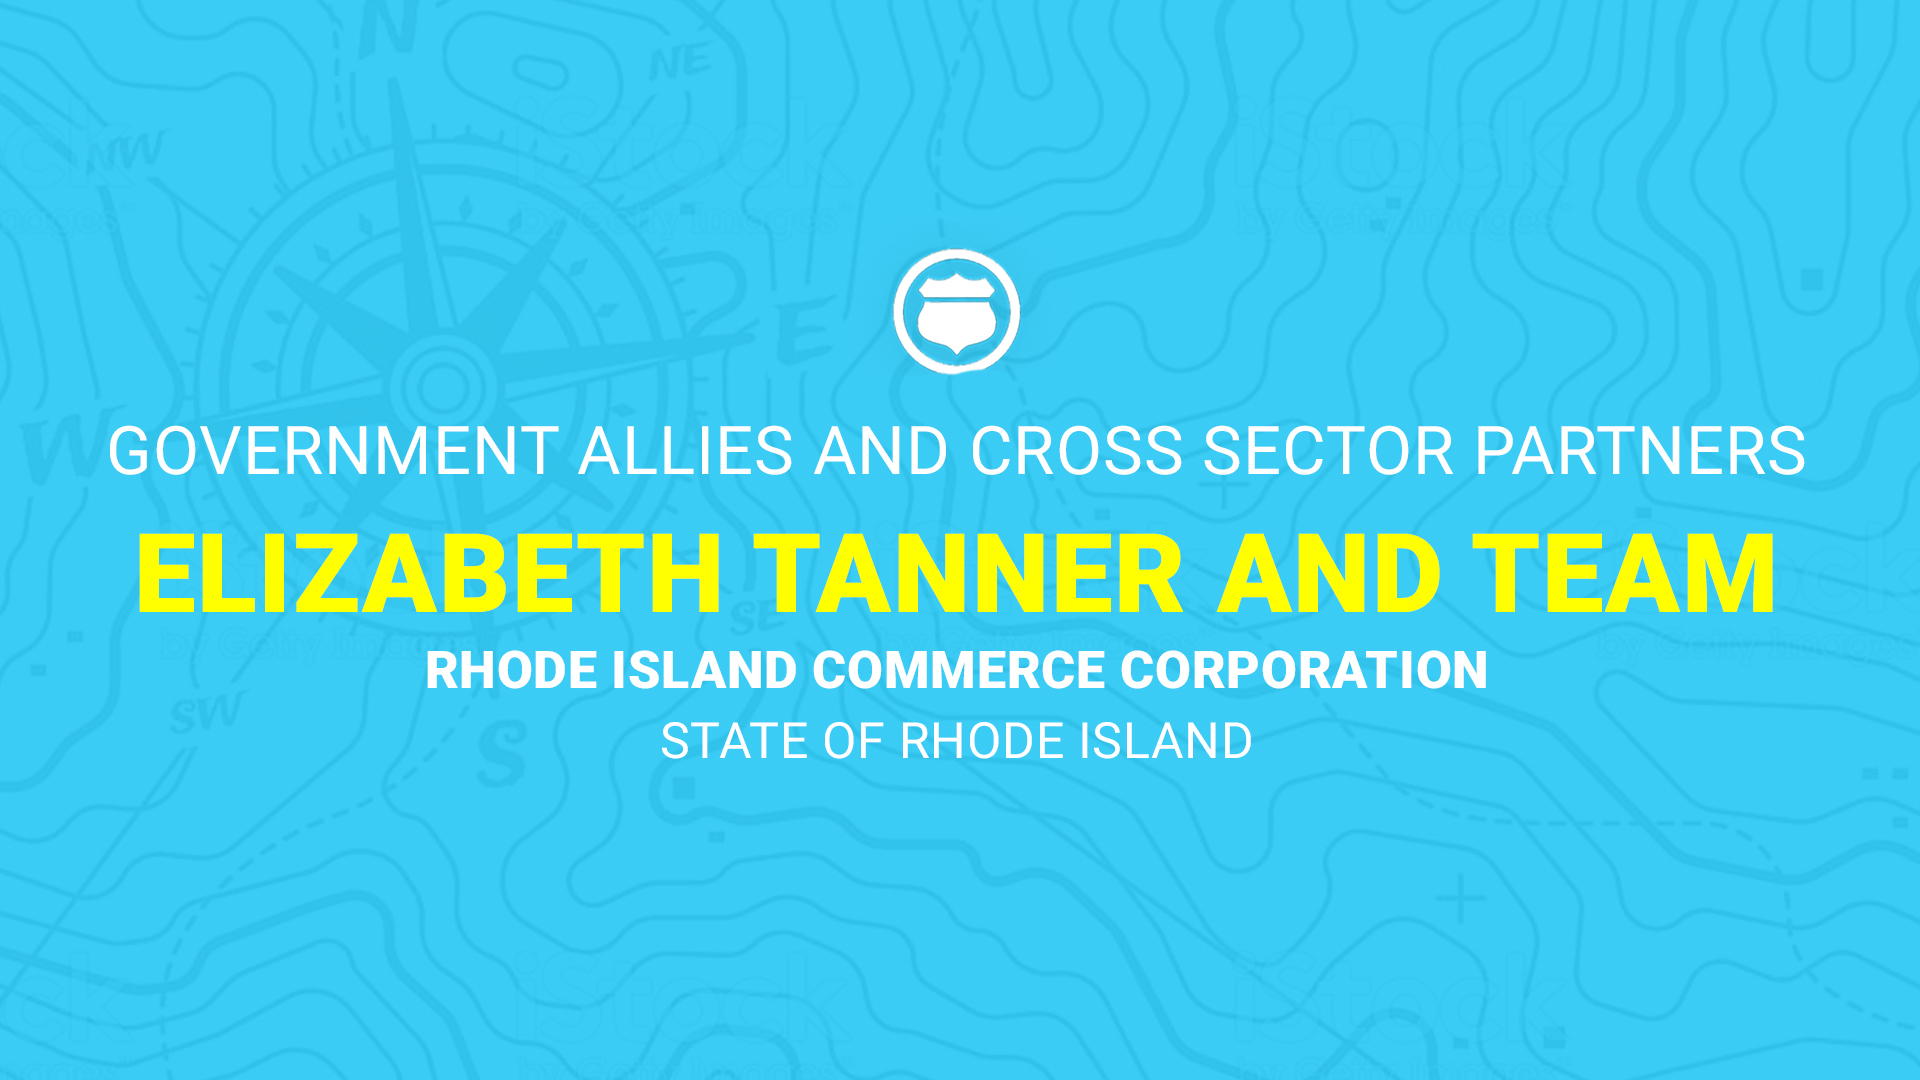 Finalists: Elizabeth Tanner and Team, Rhode Island Commerce Corporation, State of Rhode Island